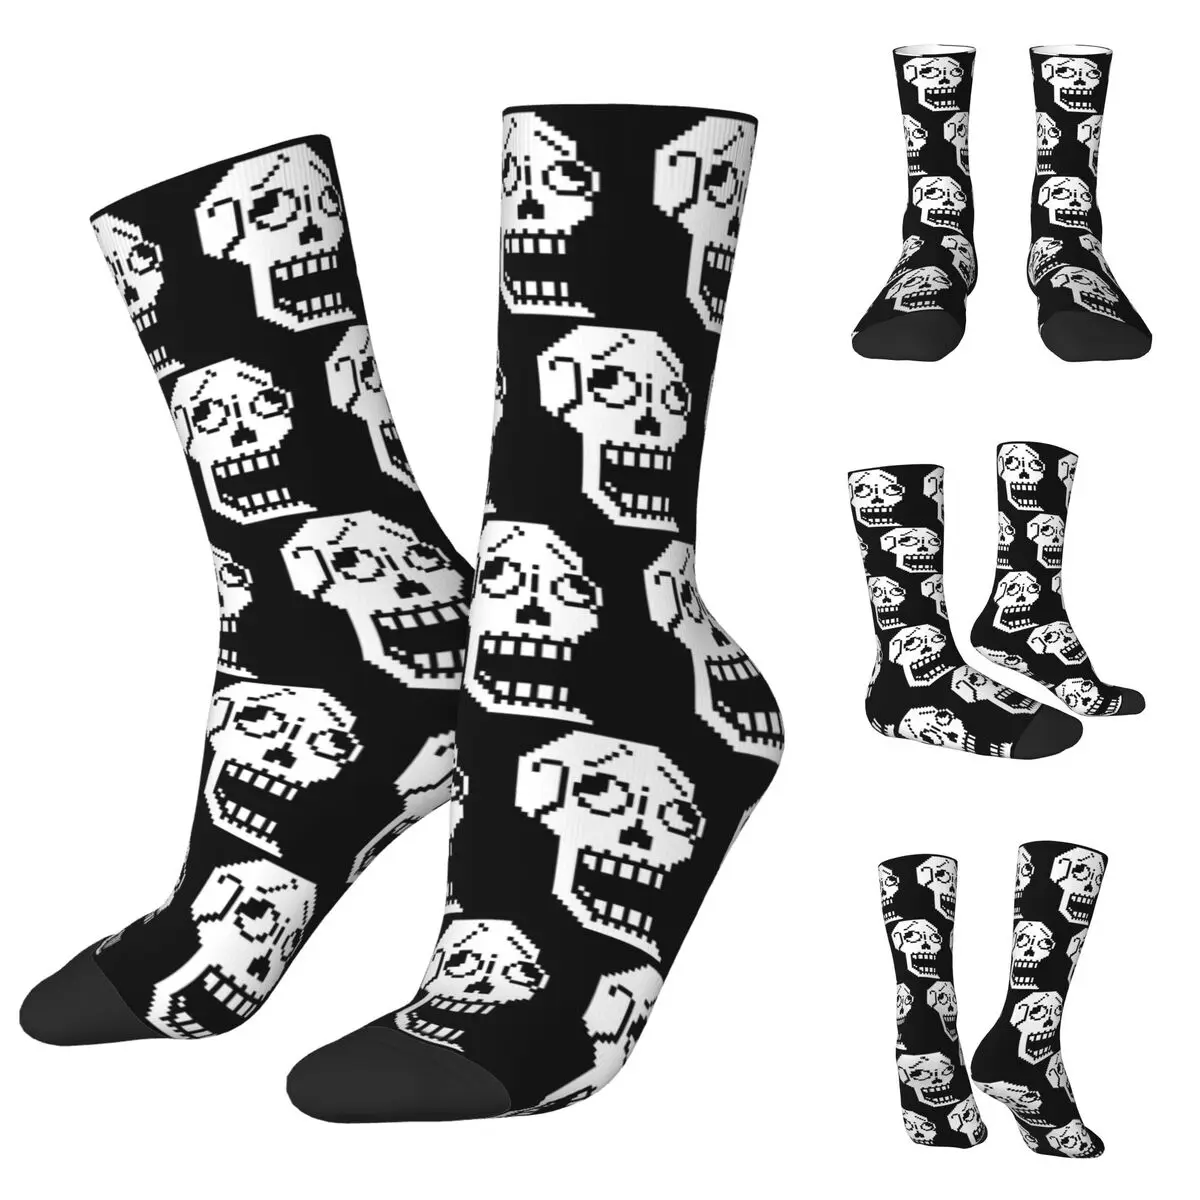 Sans And Papyrus Sprites Undertale Napstablook Men and Women printing Socks,Windproof Applicable throughout the year applicable to leser 424 460 s